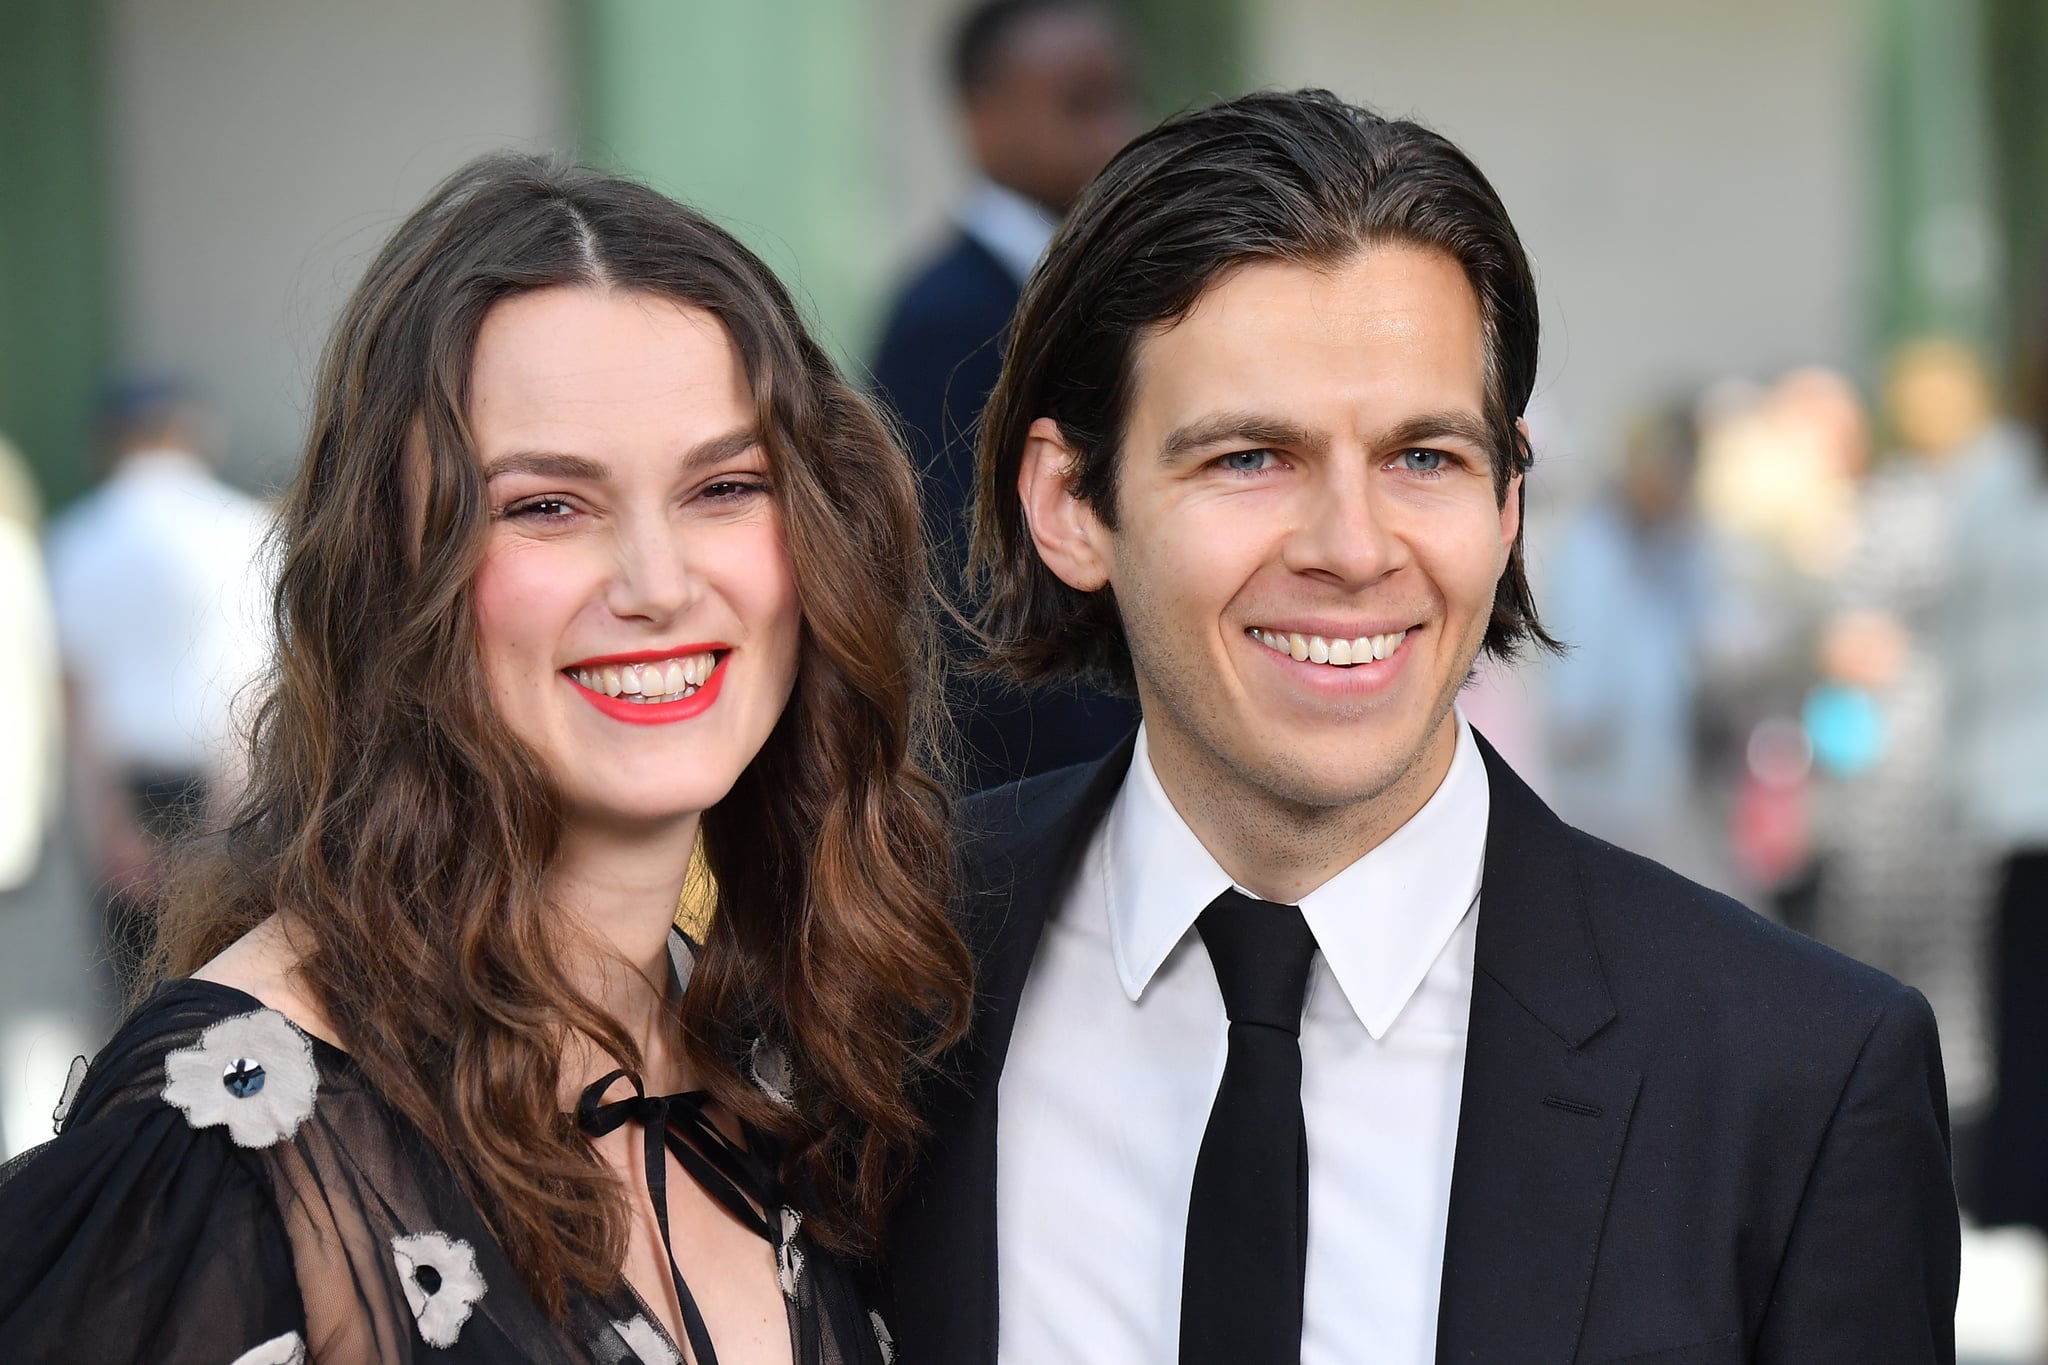 PARIS, FRANCE - MAY 03: Keira Knightley and James Righton attend the Chanel  Cruise Collection 2020 : Photocall At Grand Palais on May 03, 2019 in Paris, France. (Photo by Stephane Cardinale - Corbis/Corbis via Getty Images)